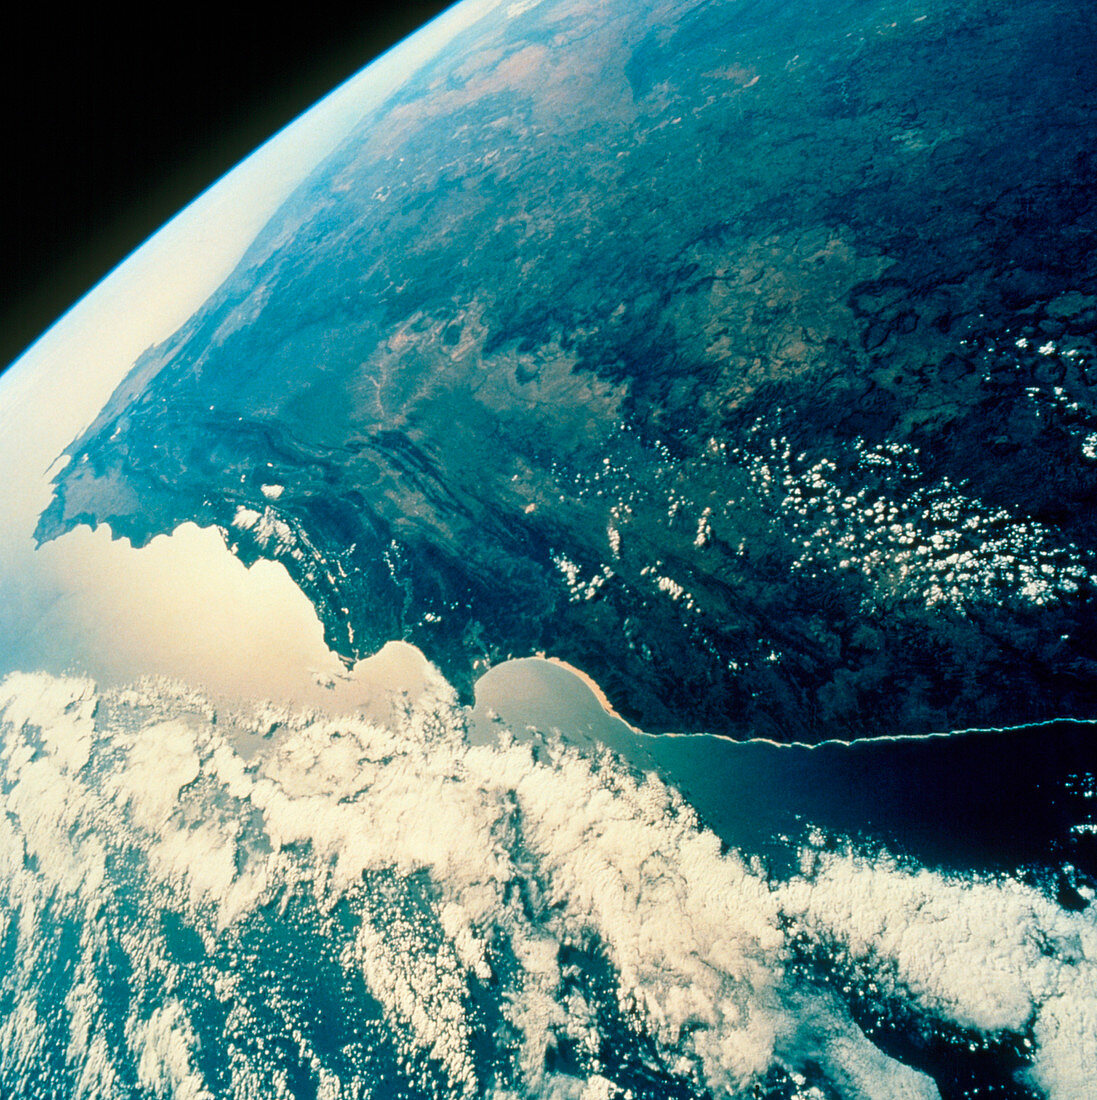 Southern coast of Africa seen from Shuttle STS-58